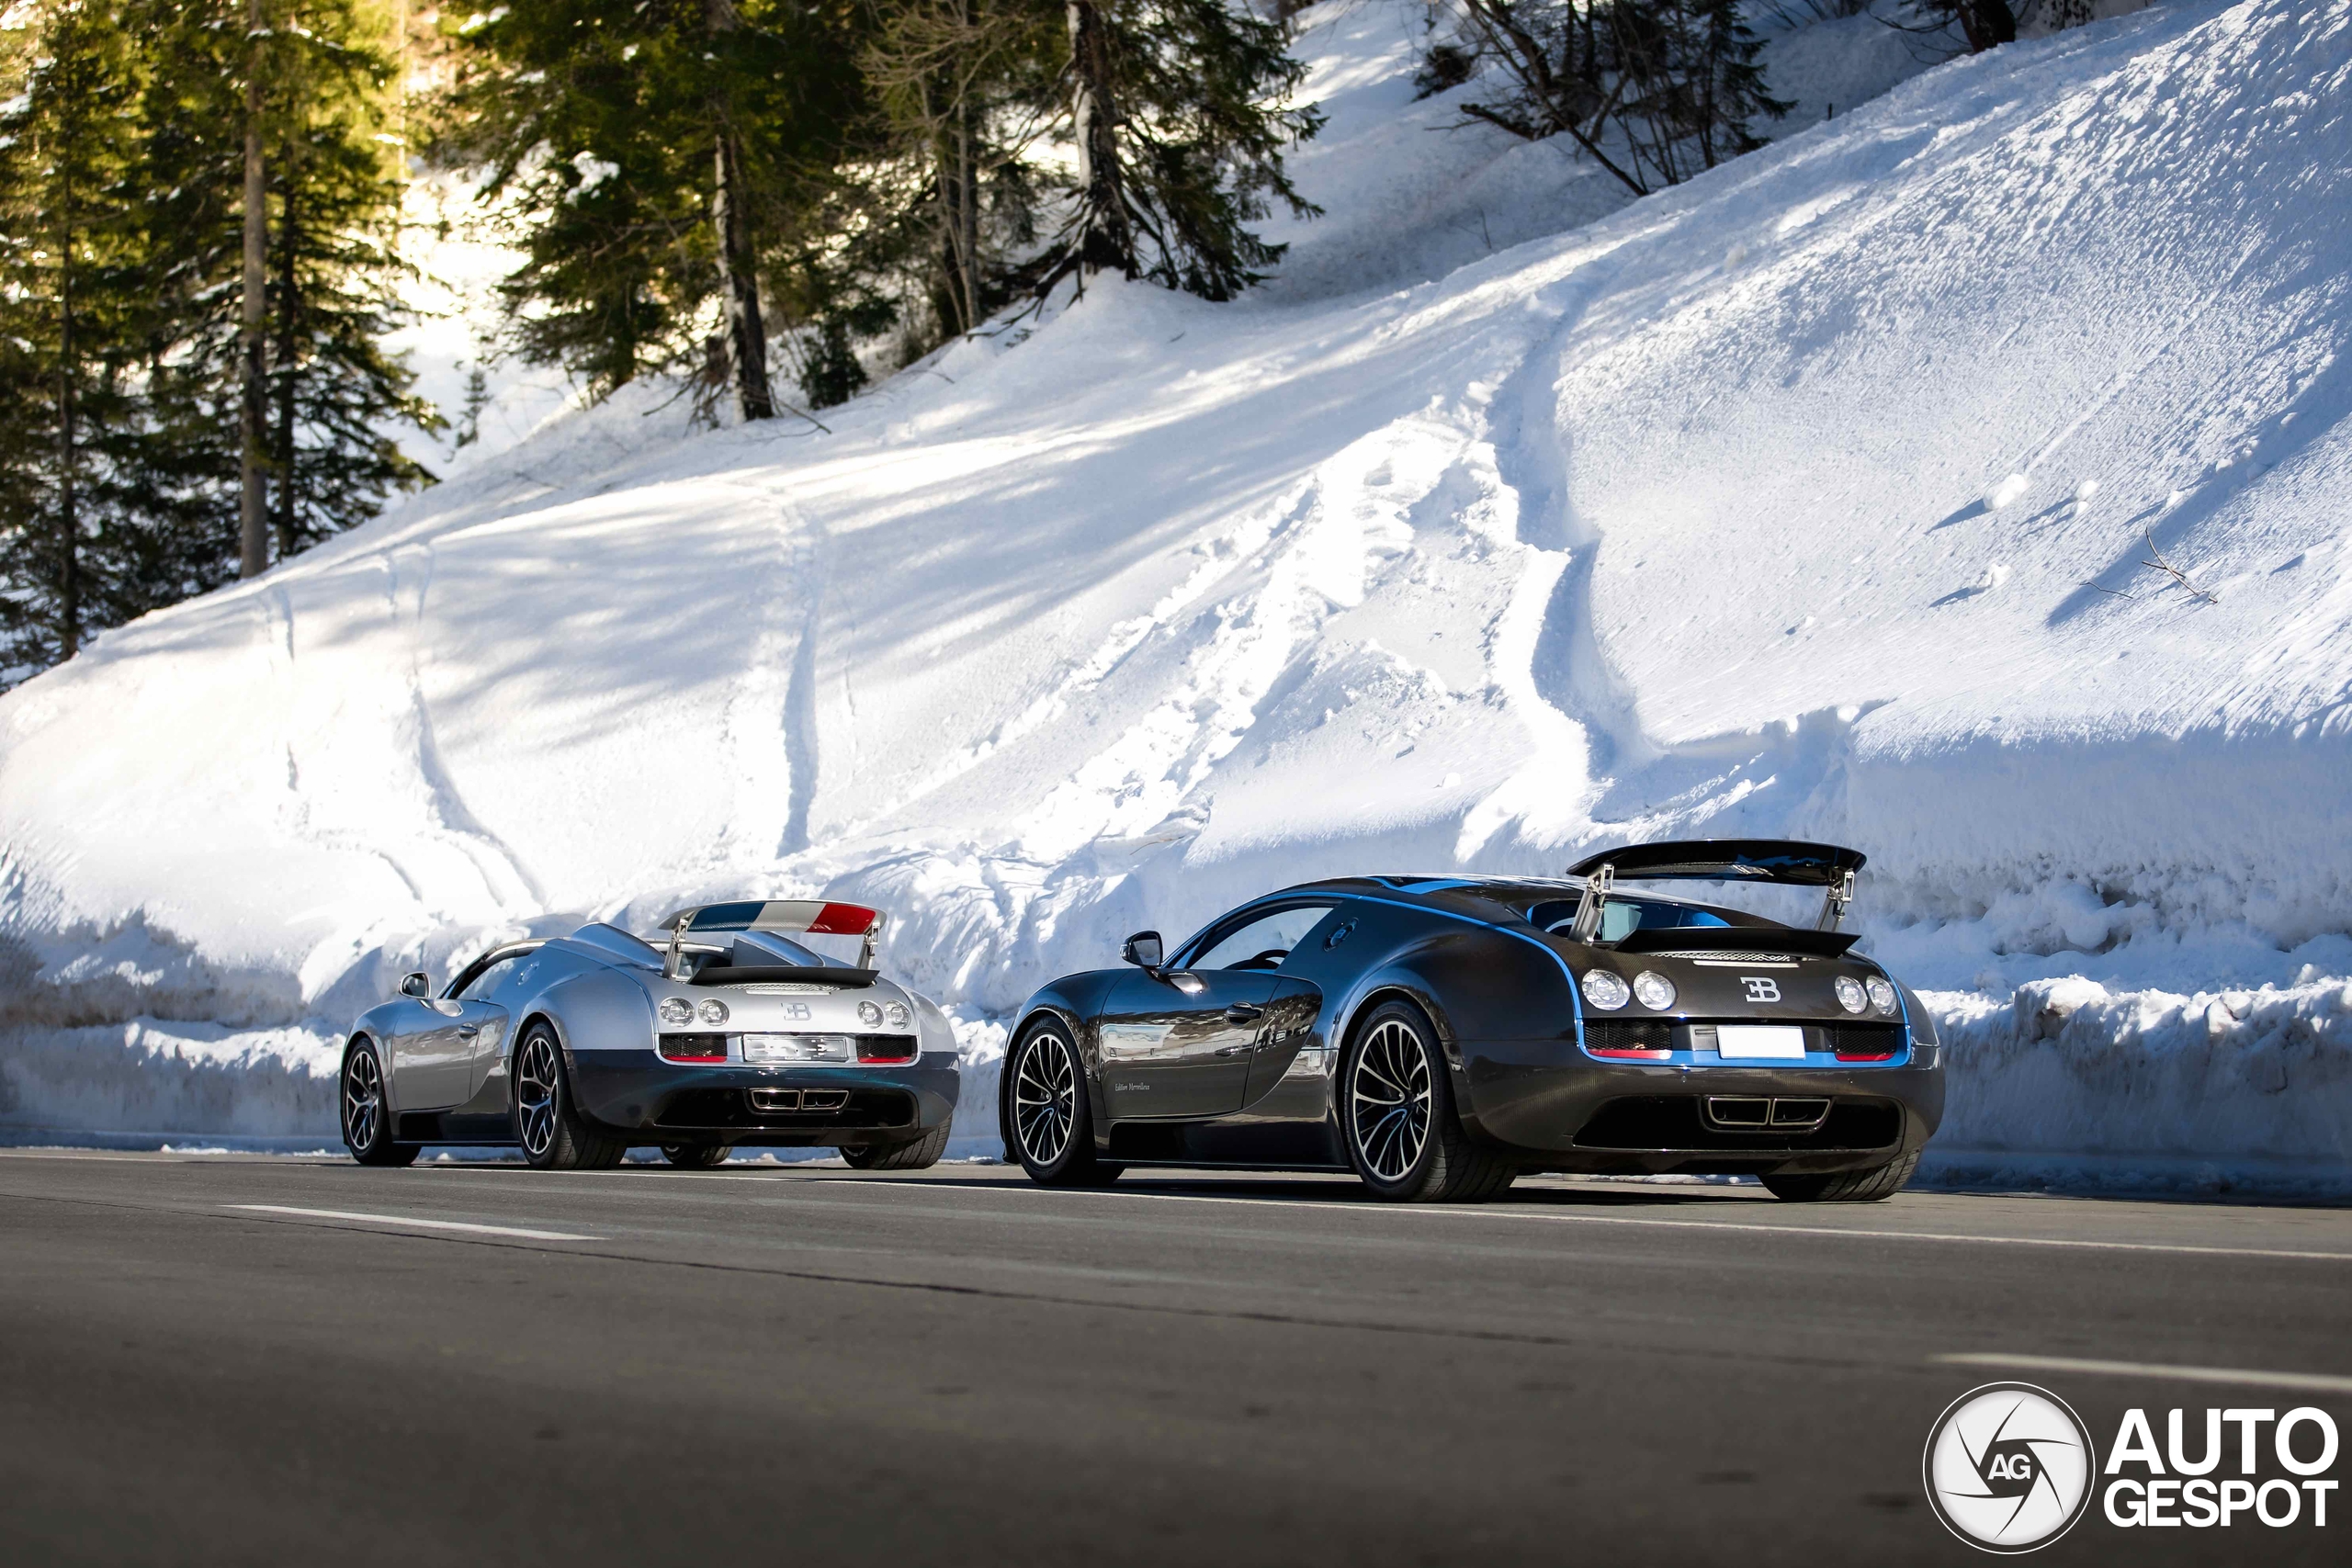 Another Bugatti combo in the Bernese alps